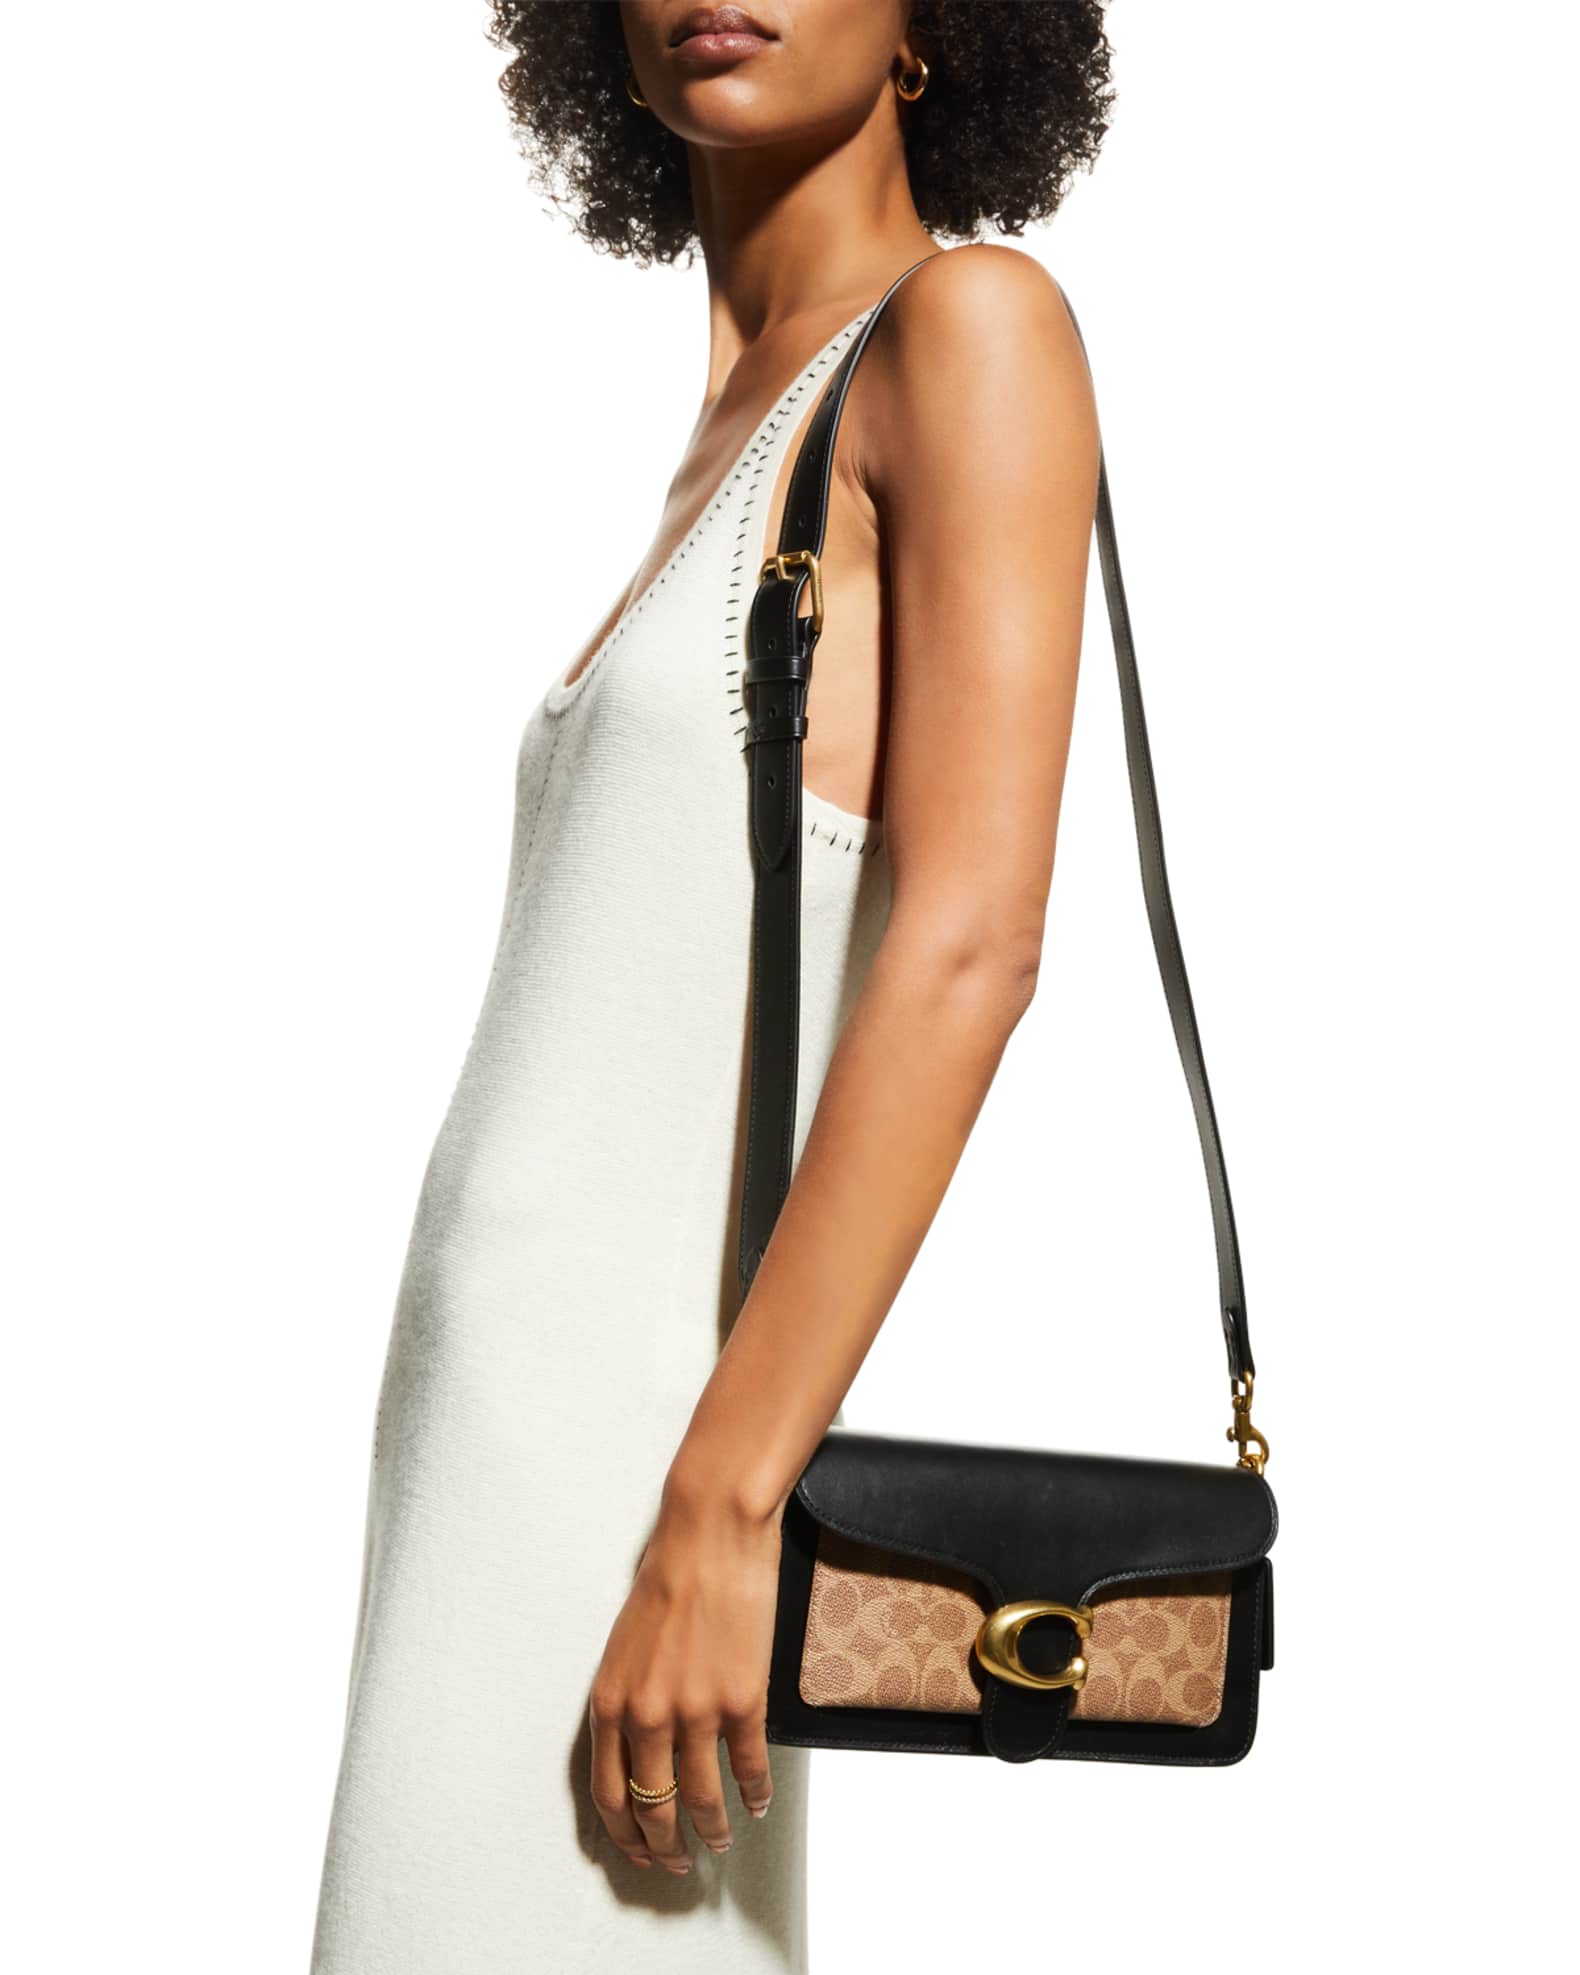 Coach Tabby Leather & Coated Canvas Signature Shoulder Bag | Neiman Marcus